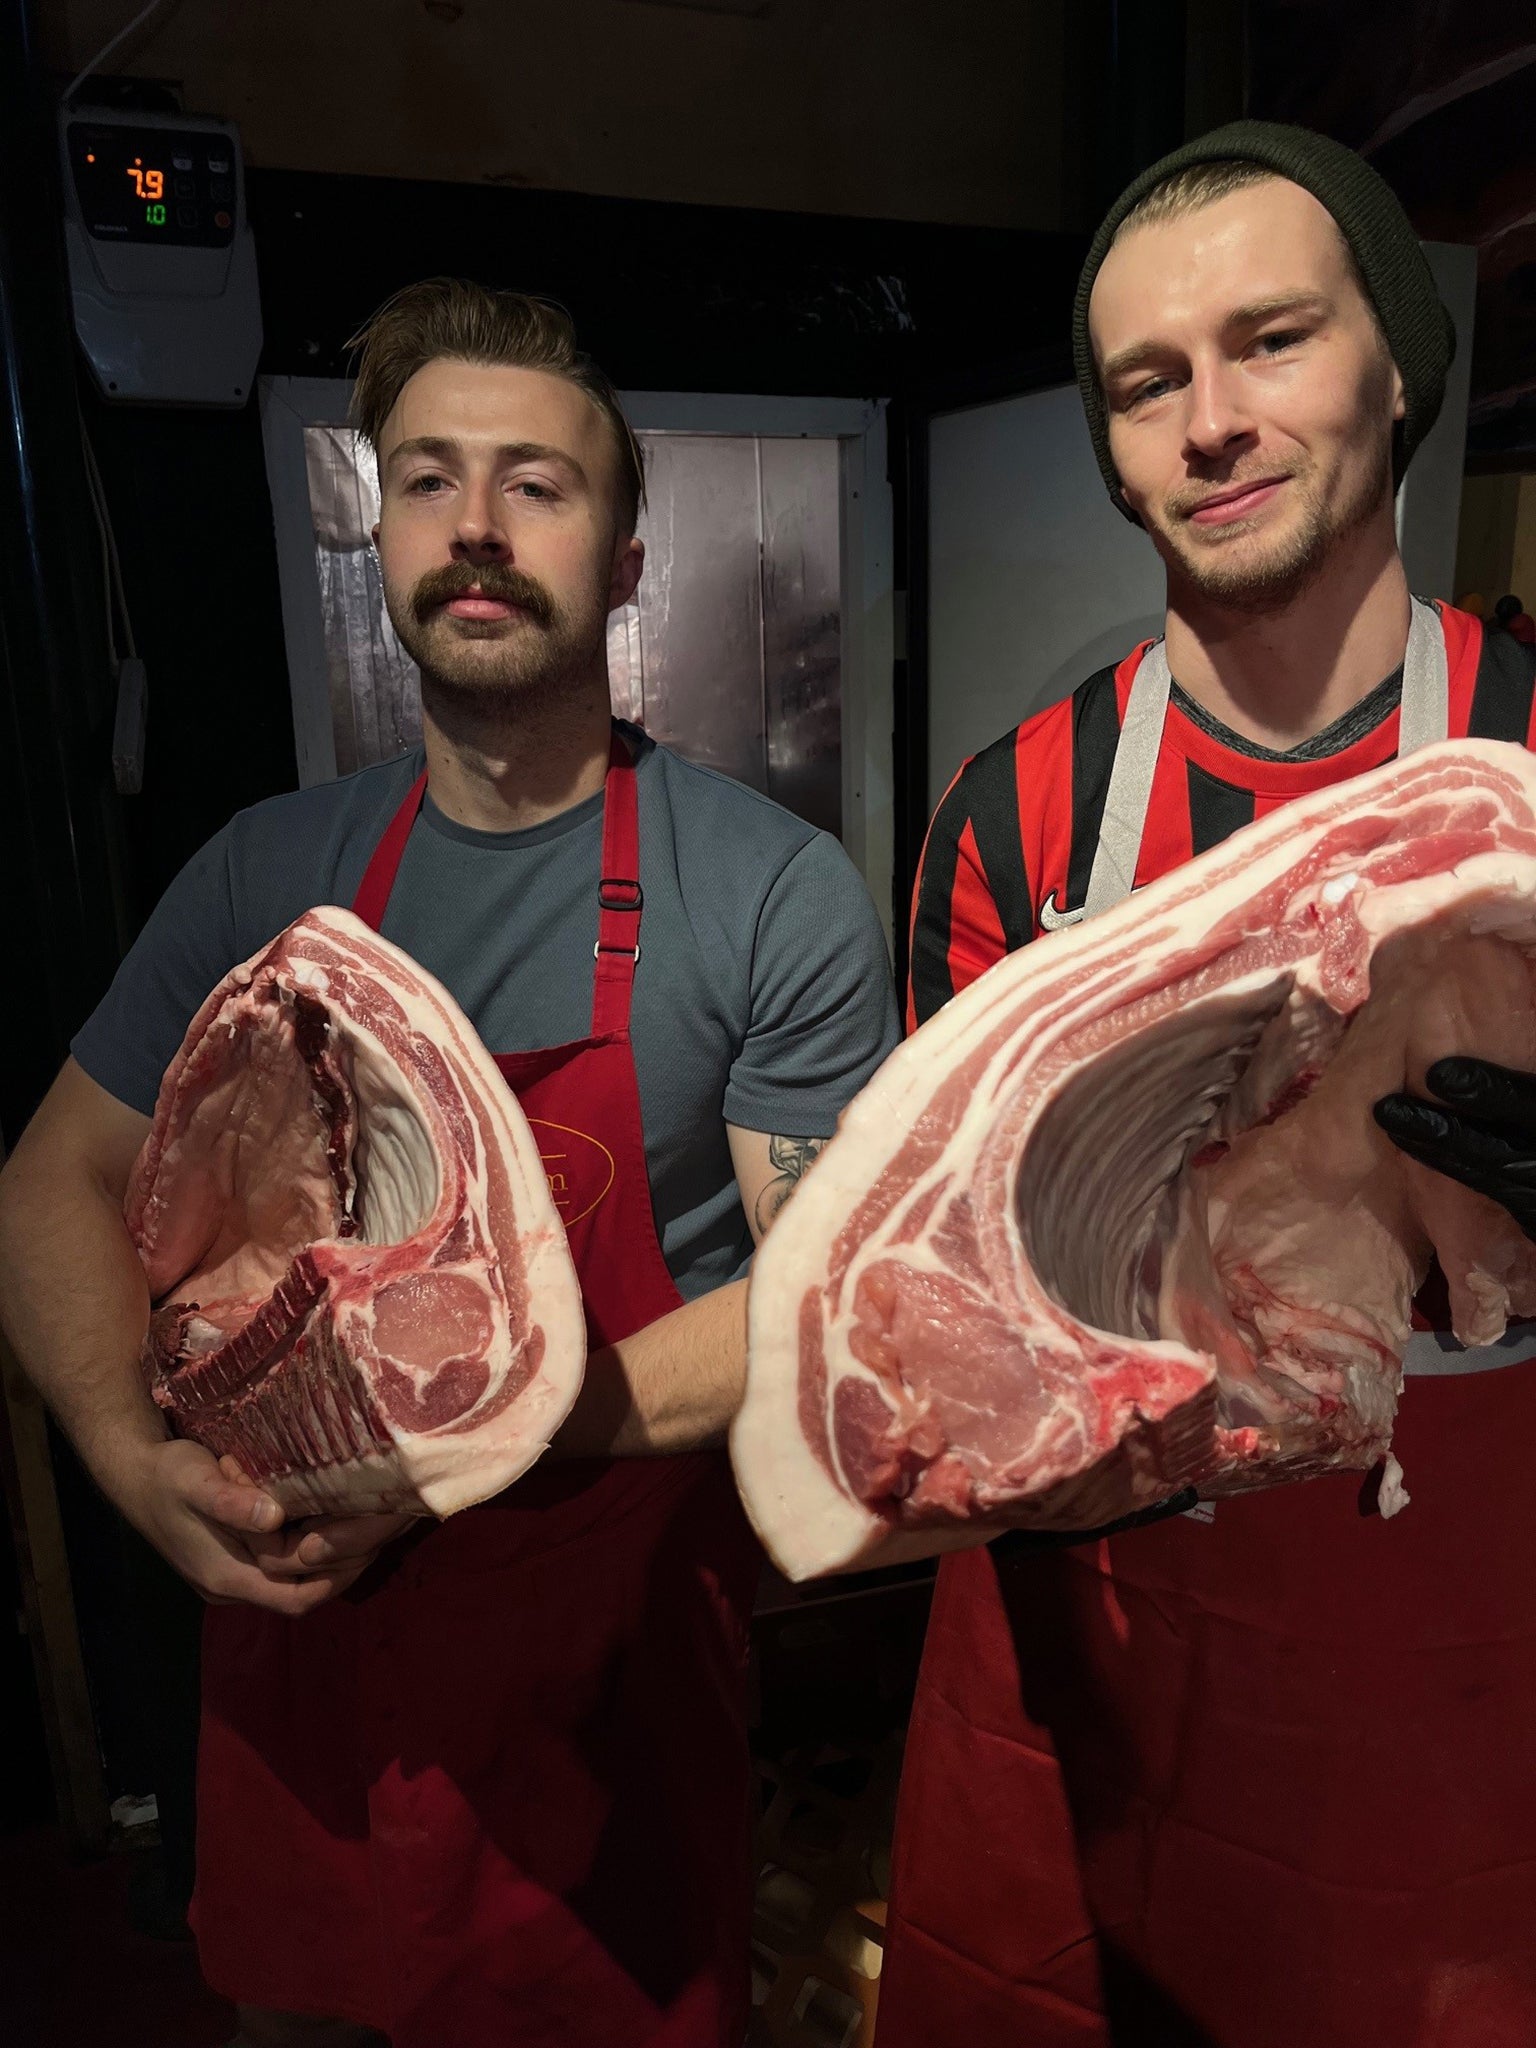 If you want a brisket, a picanha steak, some pig’s cheeks or a venison loin, you’re almost certainly going to need to visit a proper butcher like Borough’s Northfield Farm